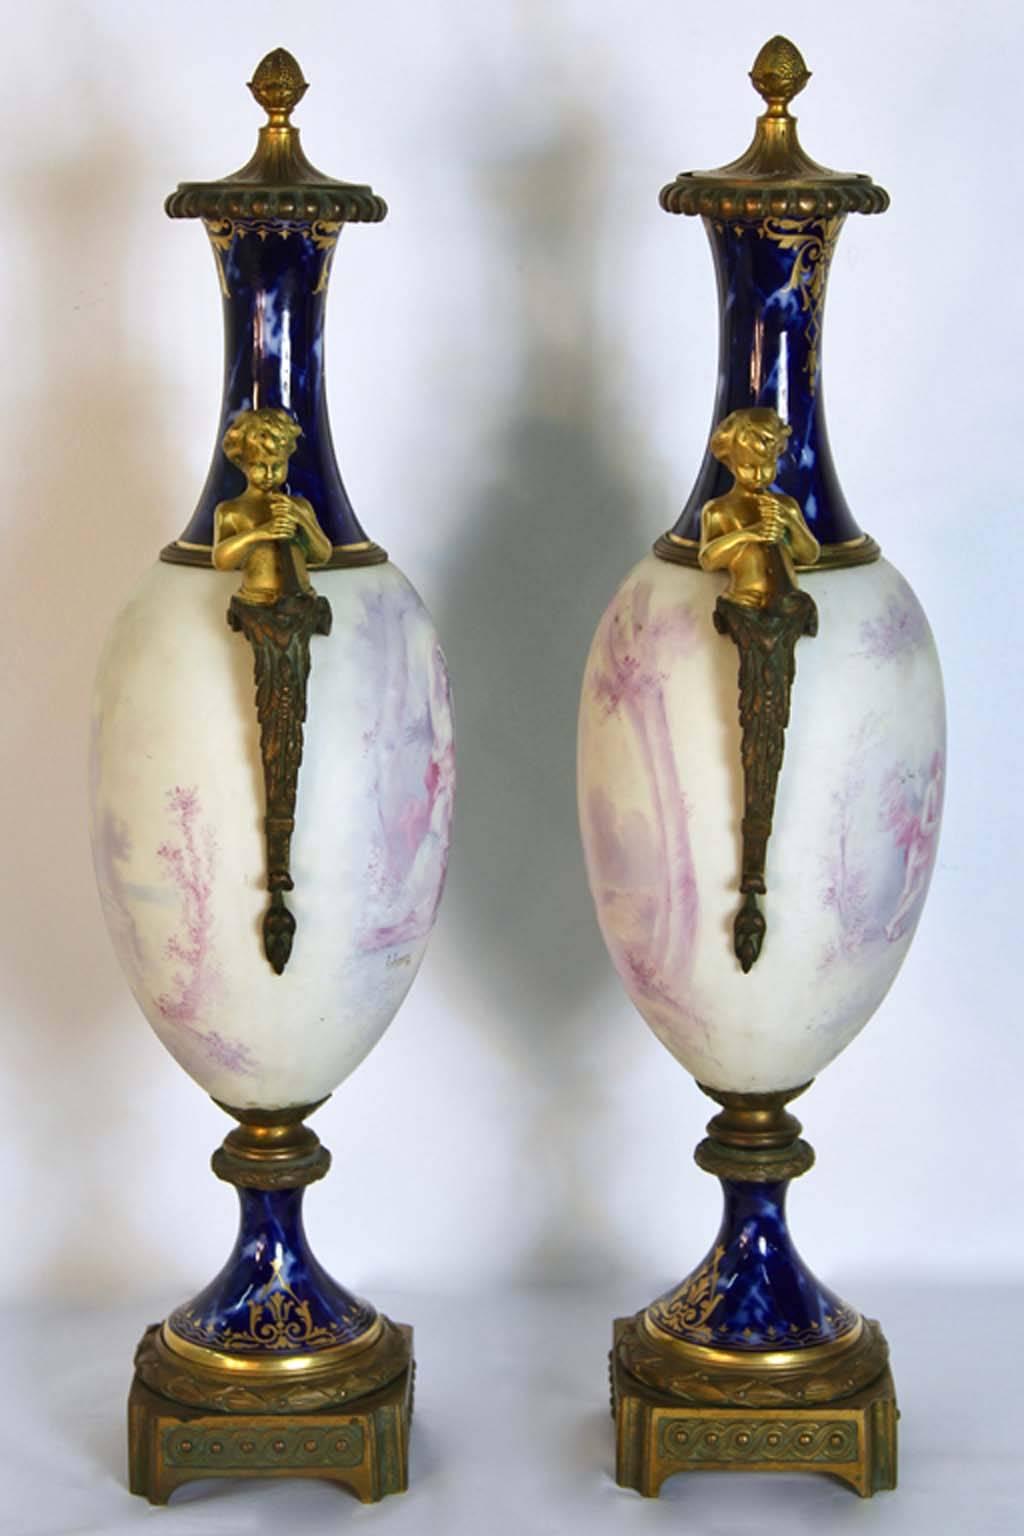 A rare pair of sevres urns with gilt bronze figural sculpture mounts of a young boy playing trumpet on the sides. Having a unique cobalt marbleized porcelain neck and base with pastel romantic scenes painted on both sides. Body rotates to show both